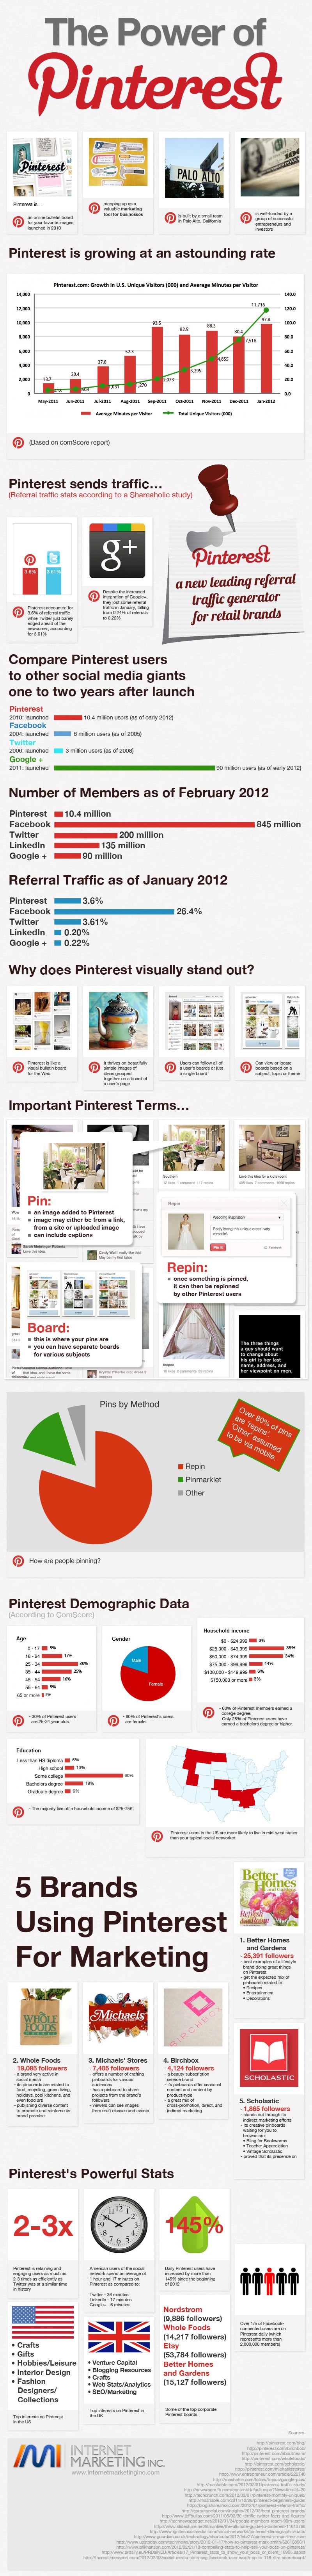 Comparing Pinterest With Facebook & Twitter [Infographic]